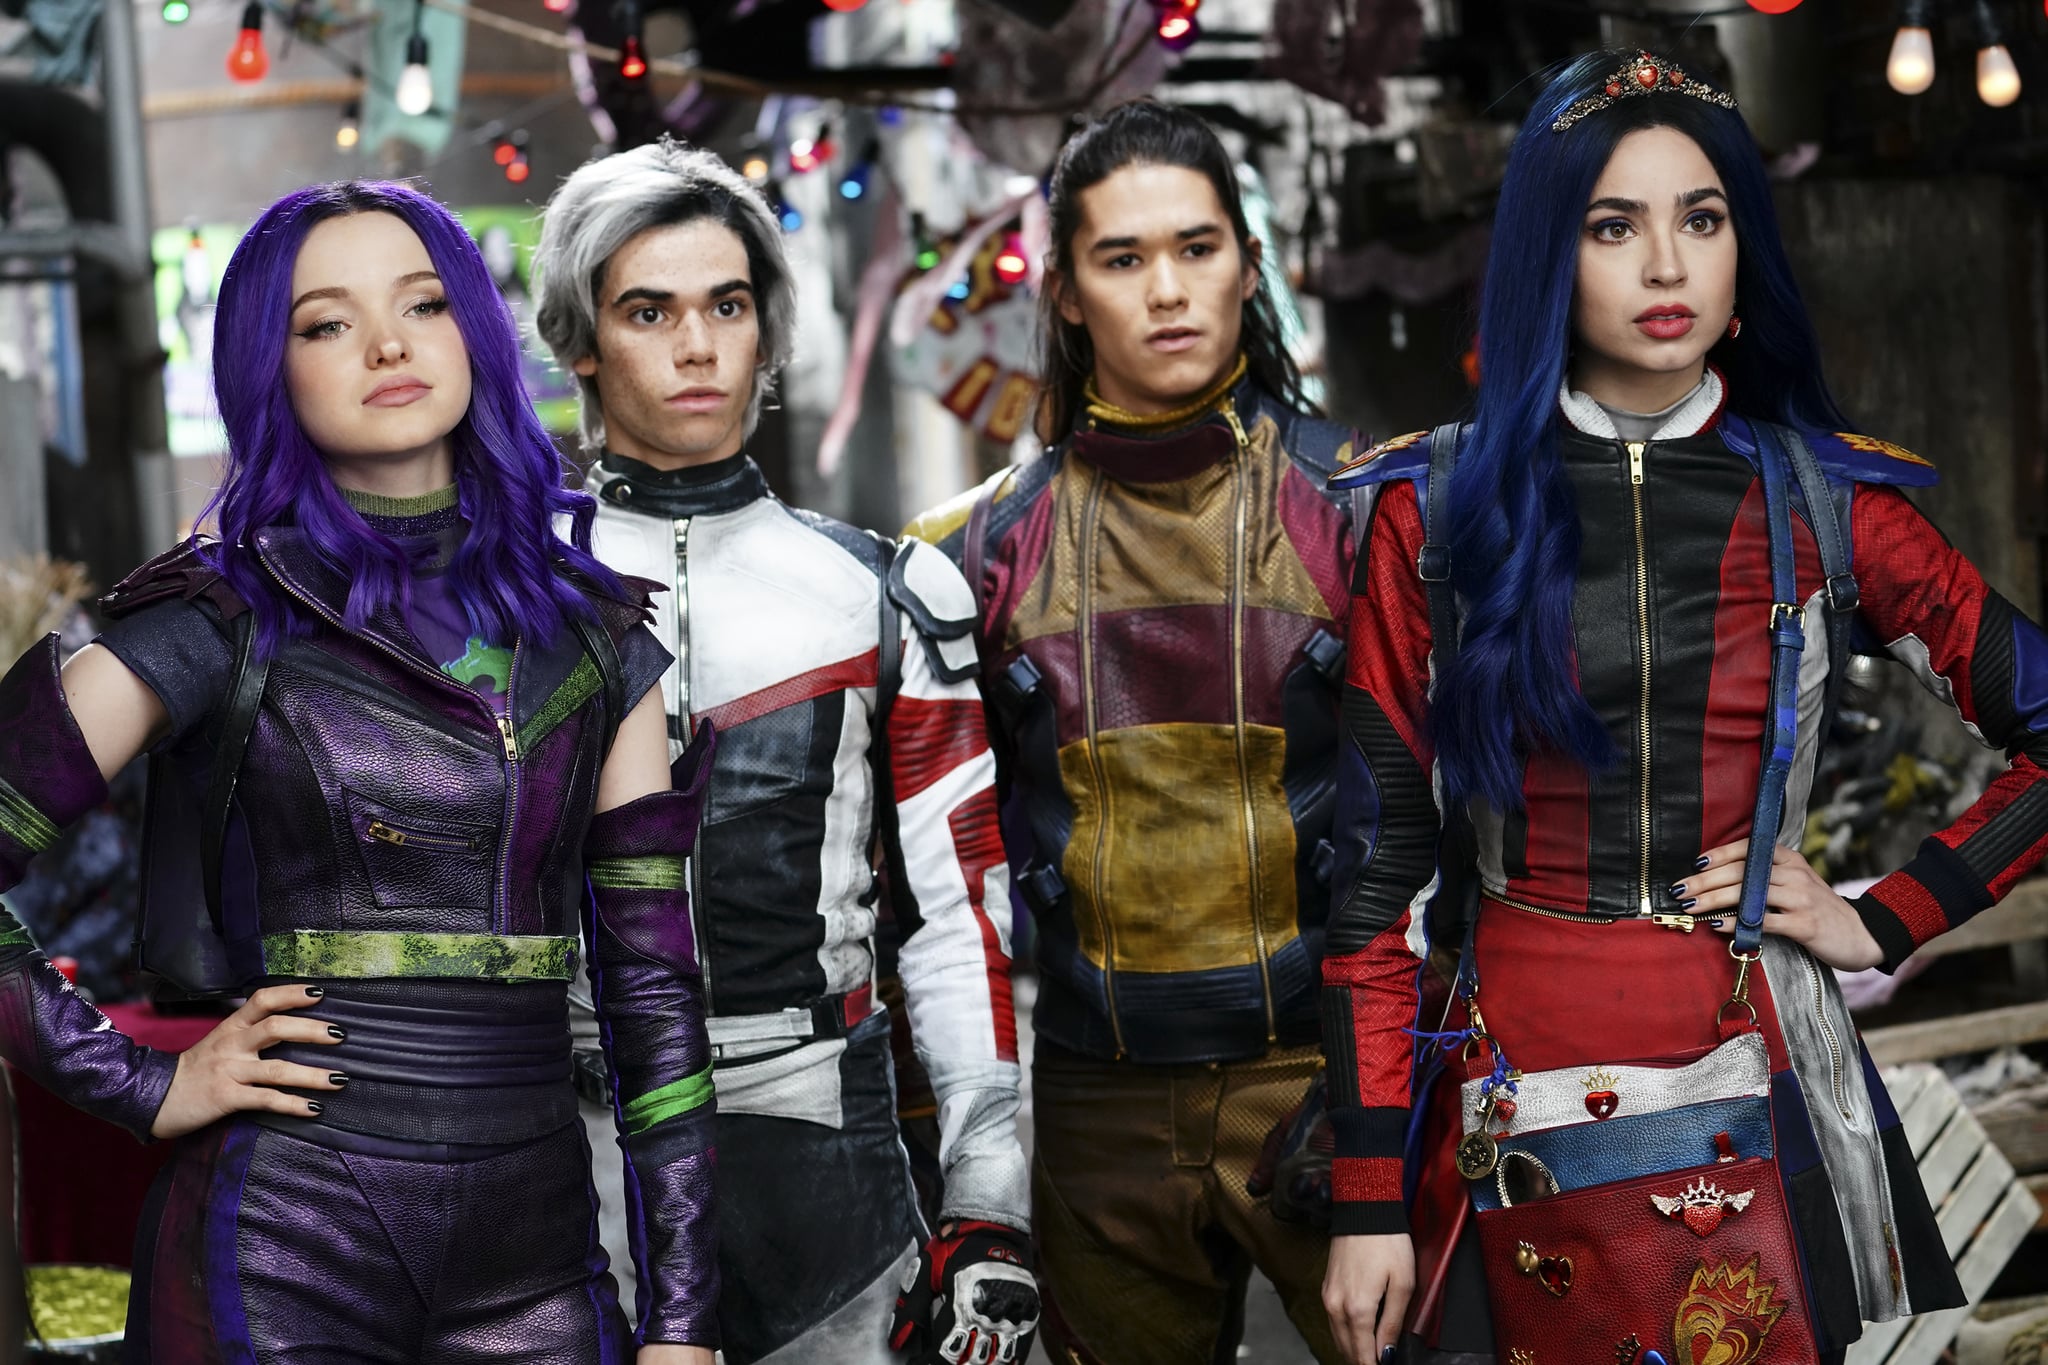 DESCENDANTS 3 - In this highly anticipated trequel about the sons and daughters of Disney's most infamous villains, Mal and the villain kids (VKs) must save Auradon from an evil threat. 